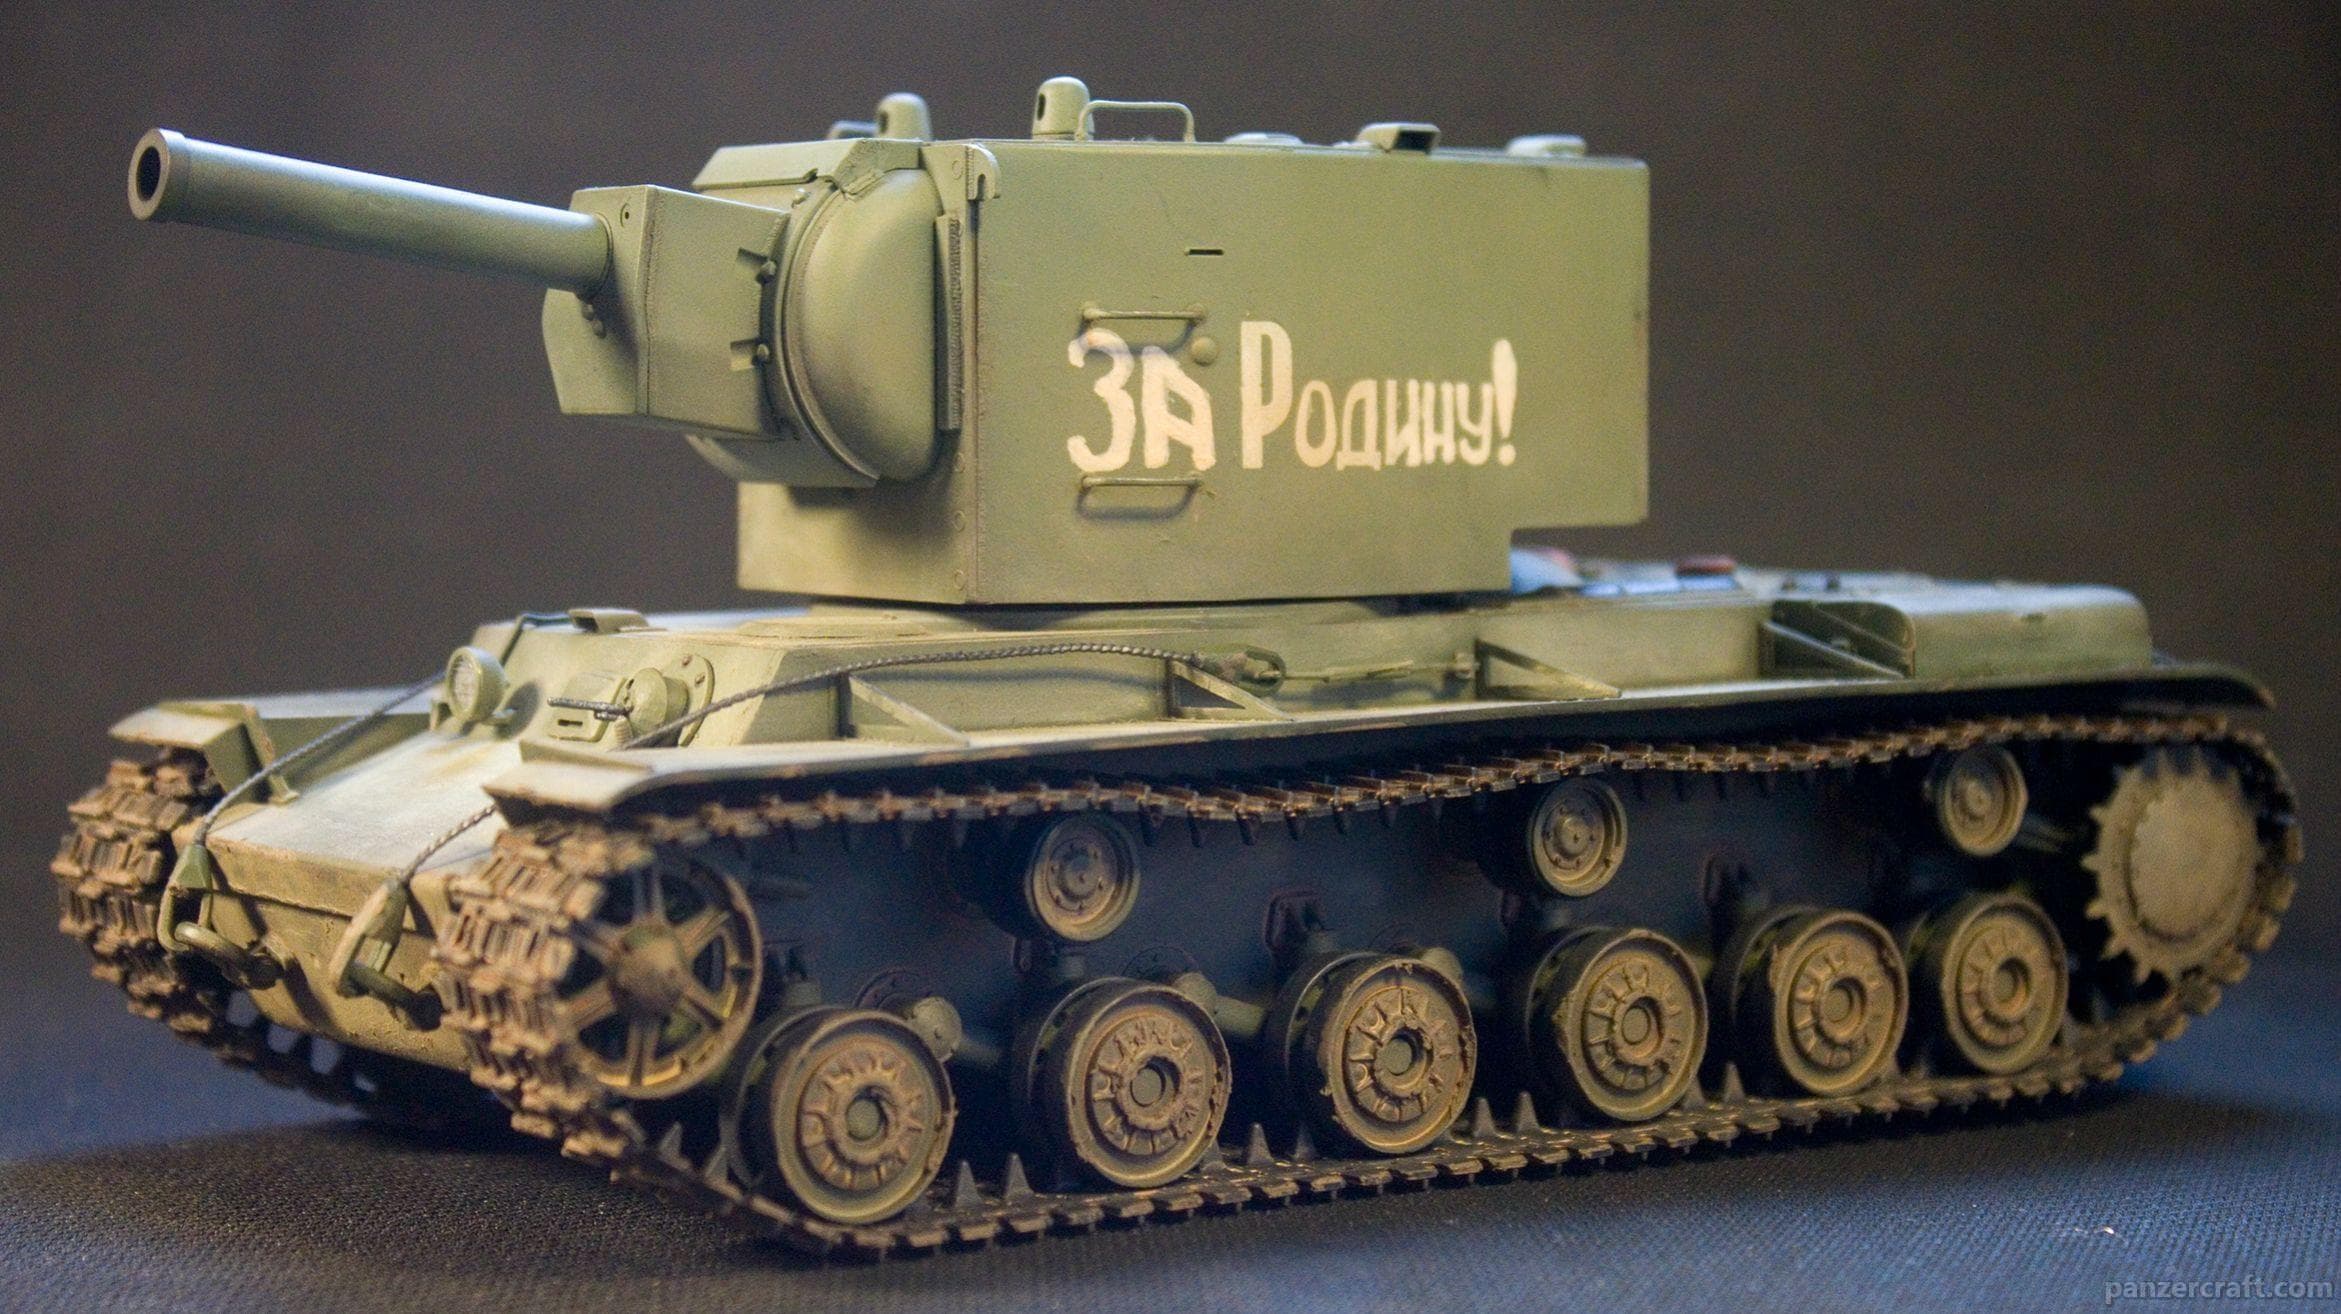 KV-2 - I messed up the water decal and opted to paint the letters by hand. Looks OK.